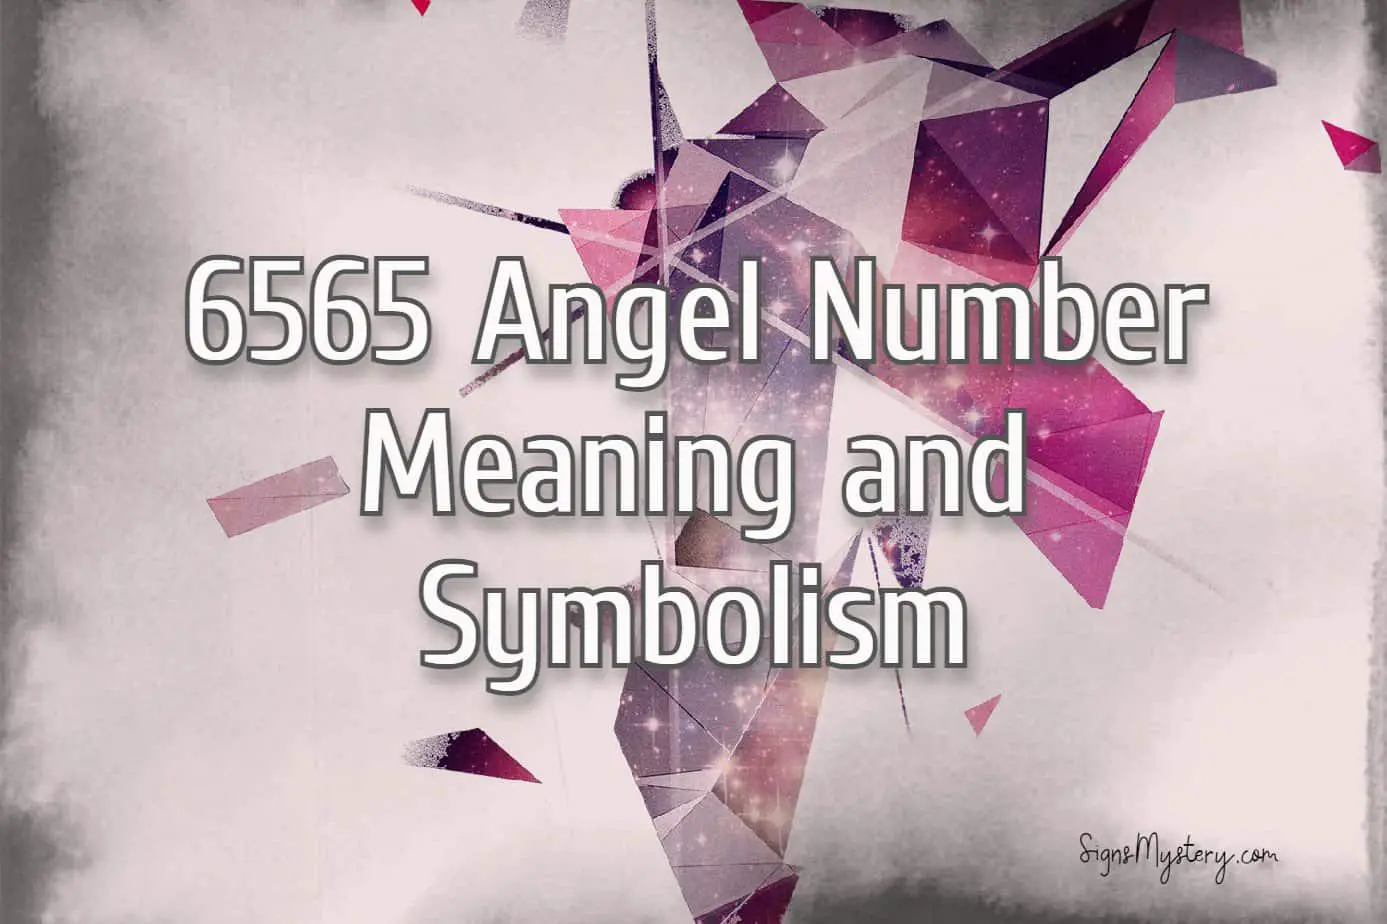 6565 Angel Number Meaning and Symbolism  SignsMystery